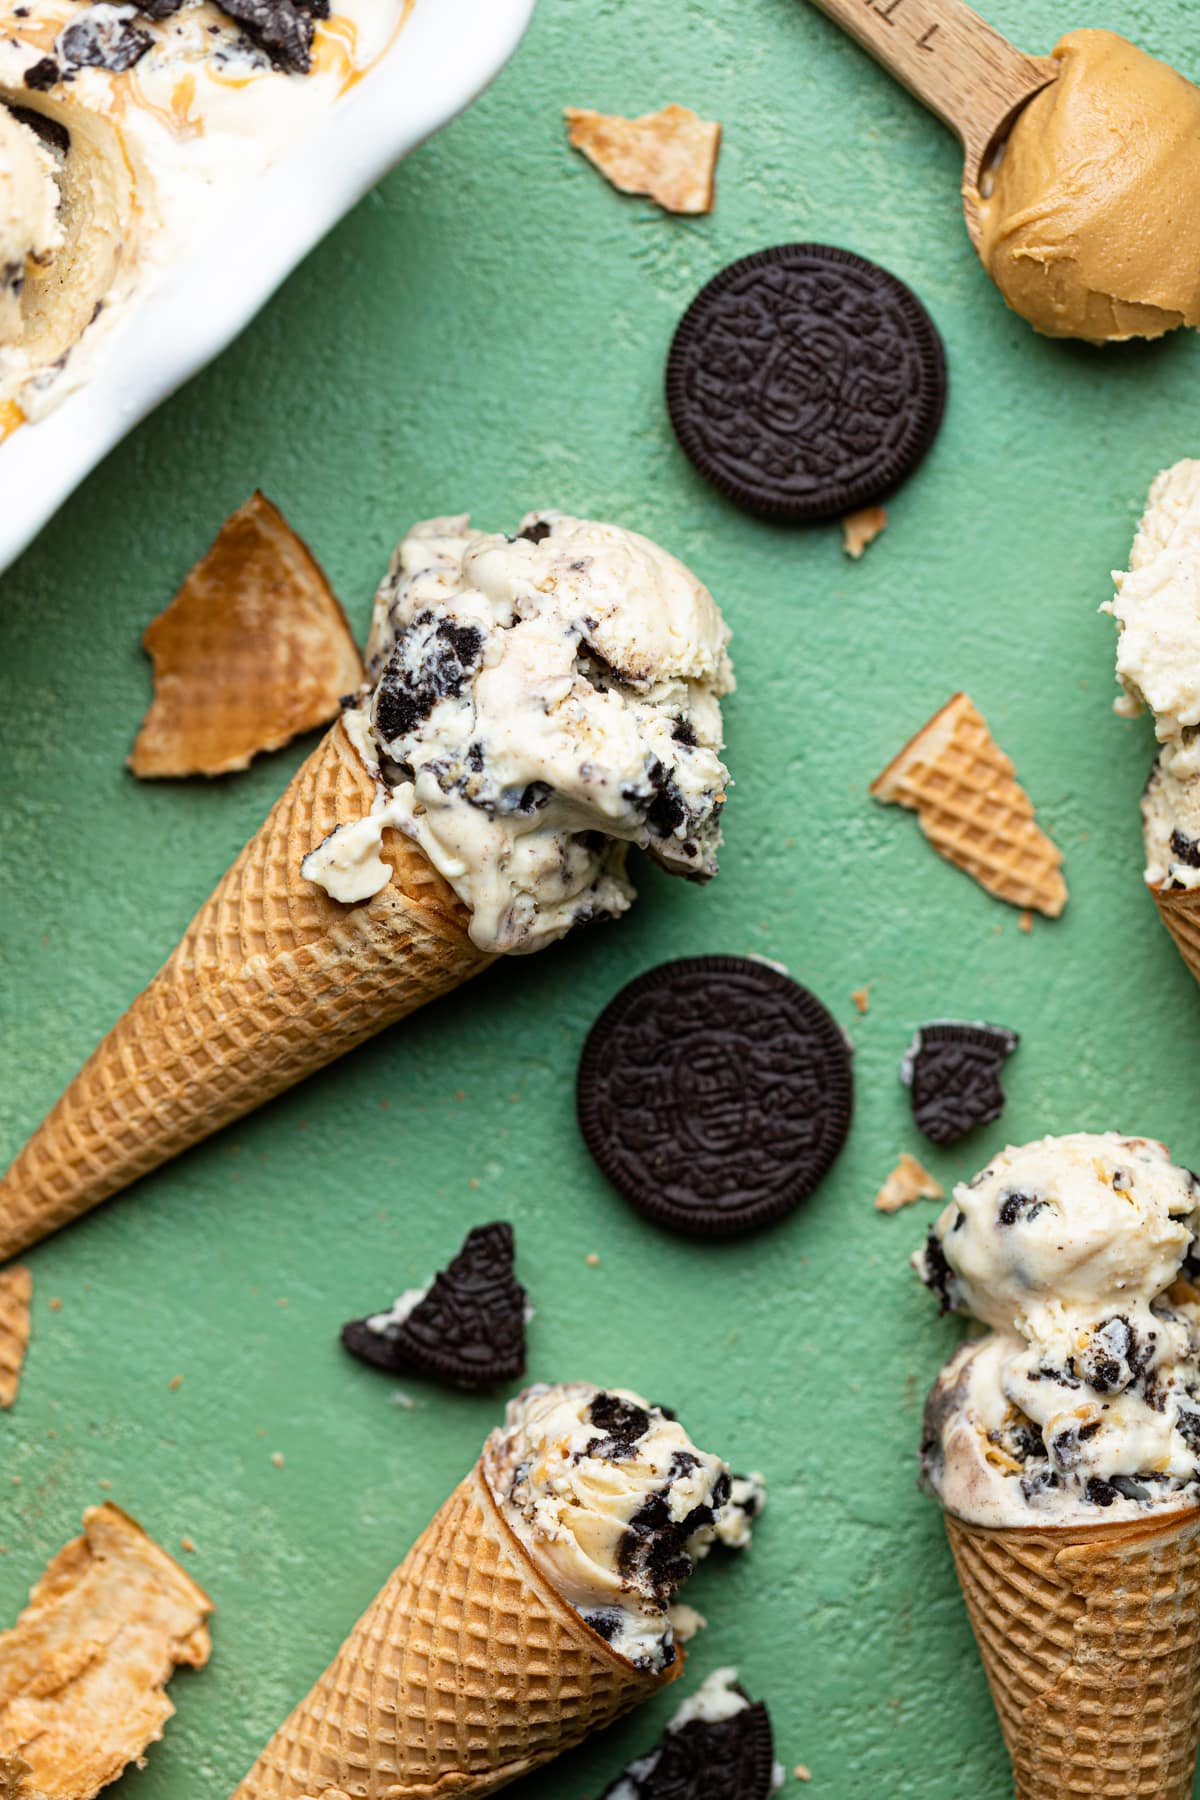 Ice cream on a cone laying on a green table with other ice creams and oreo cookies.